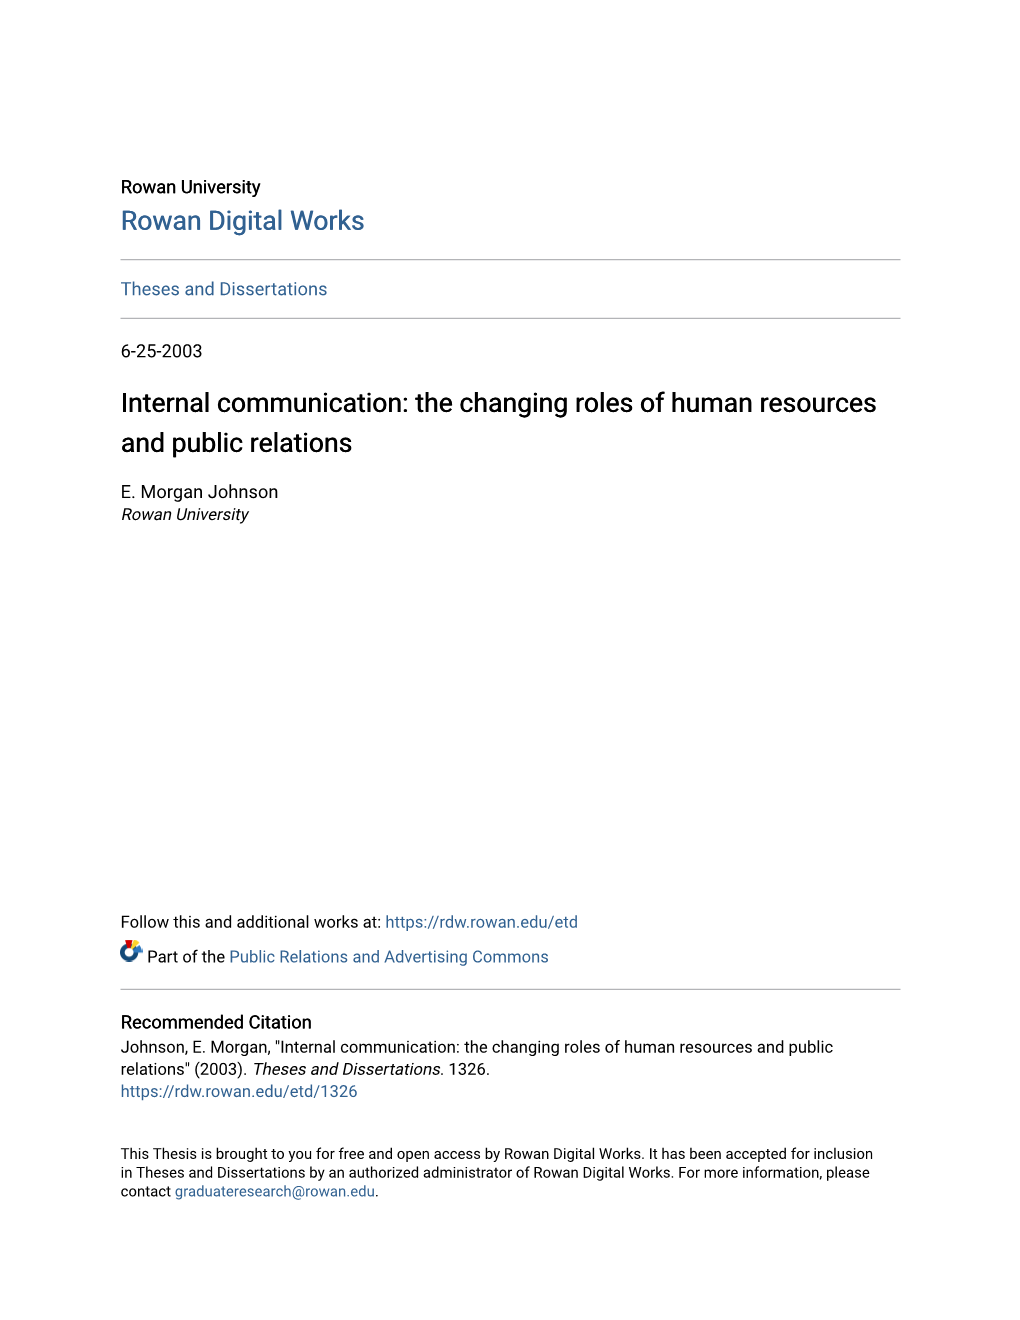 Internal Communication: the Changing Roles of Human Resources and Public Relations